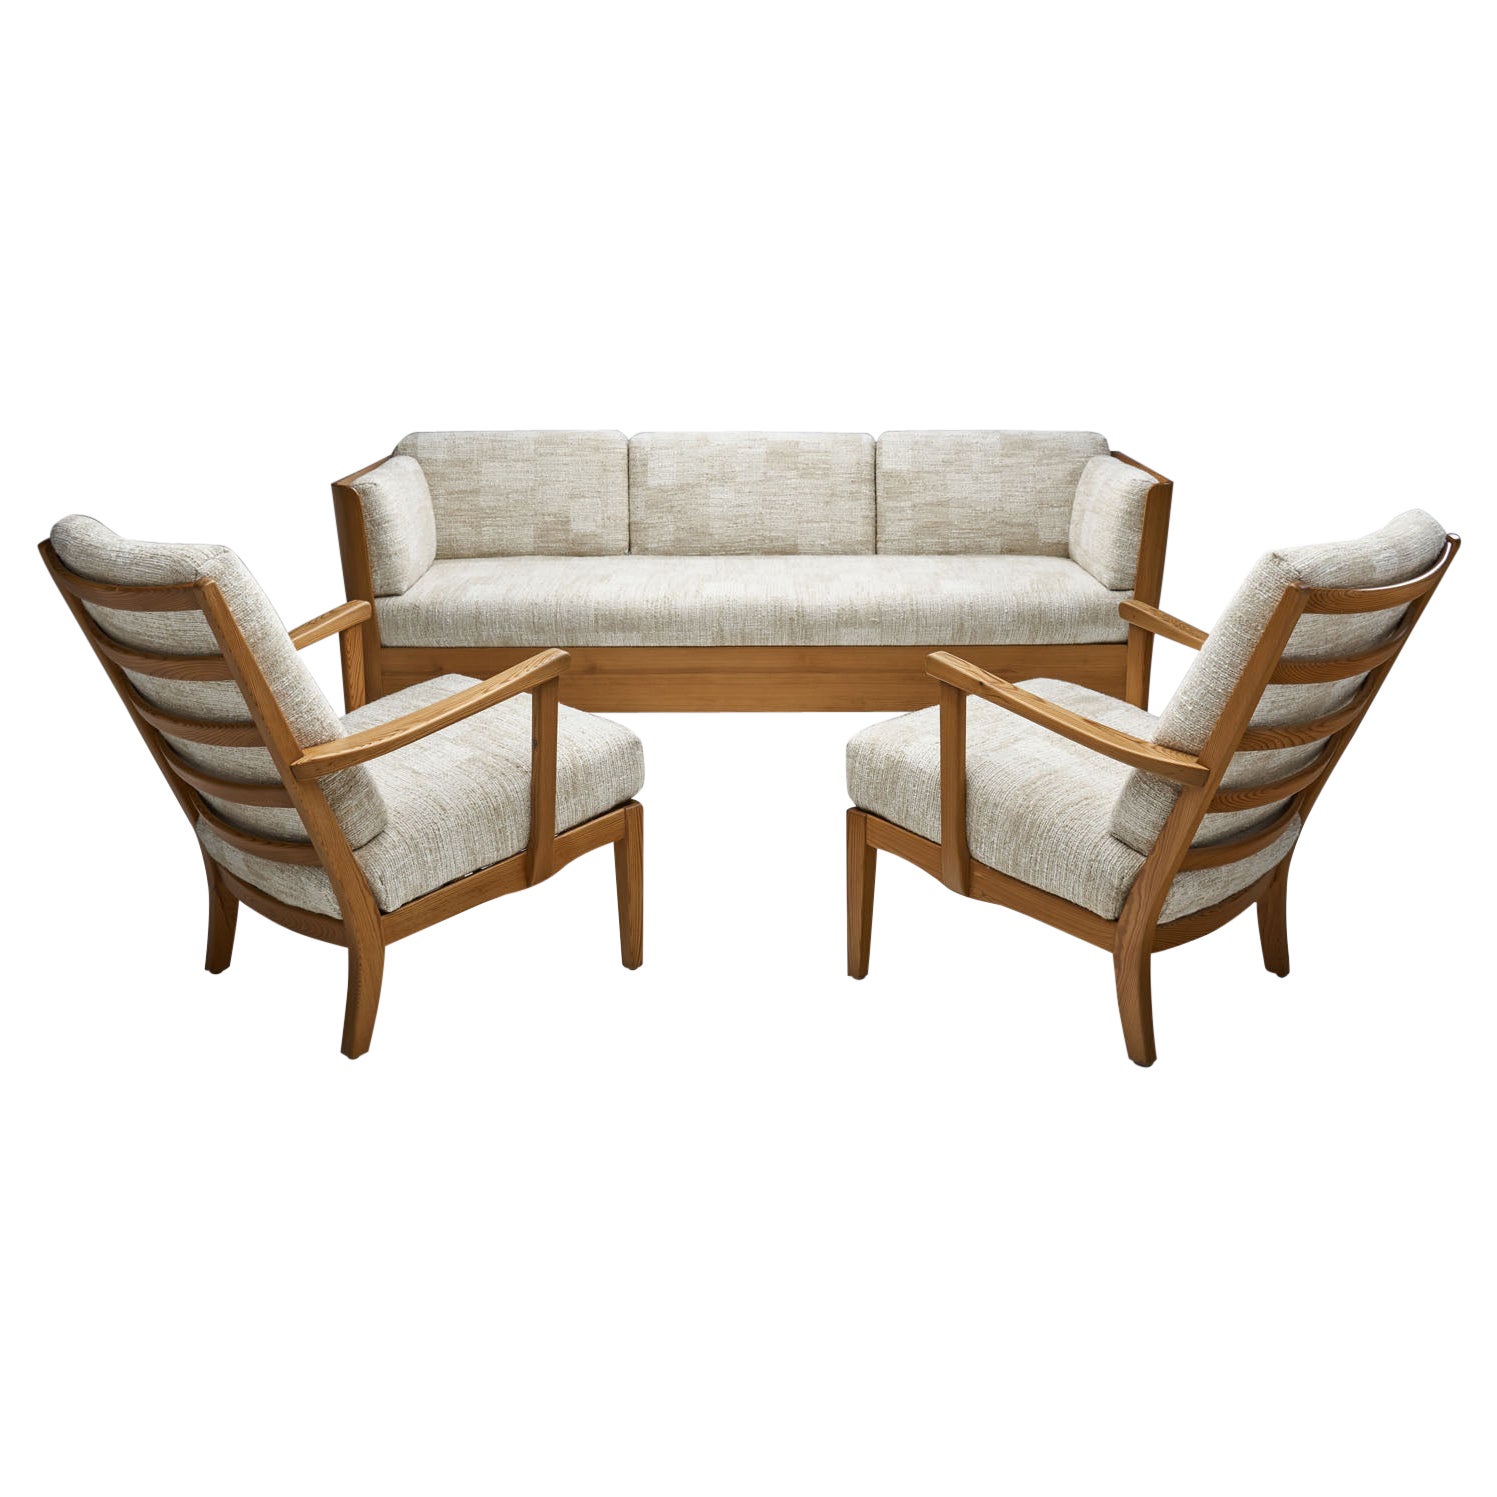 Carl Malmsten Pine Sofa Bed and “Visingsö” Armchairs, Sweden 1940s